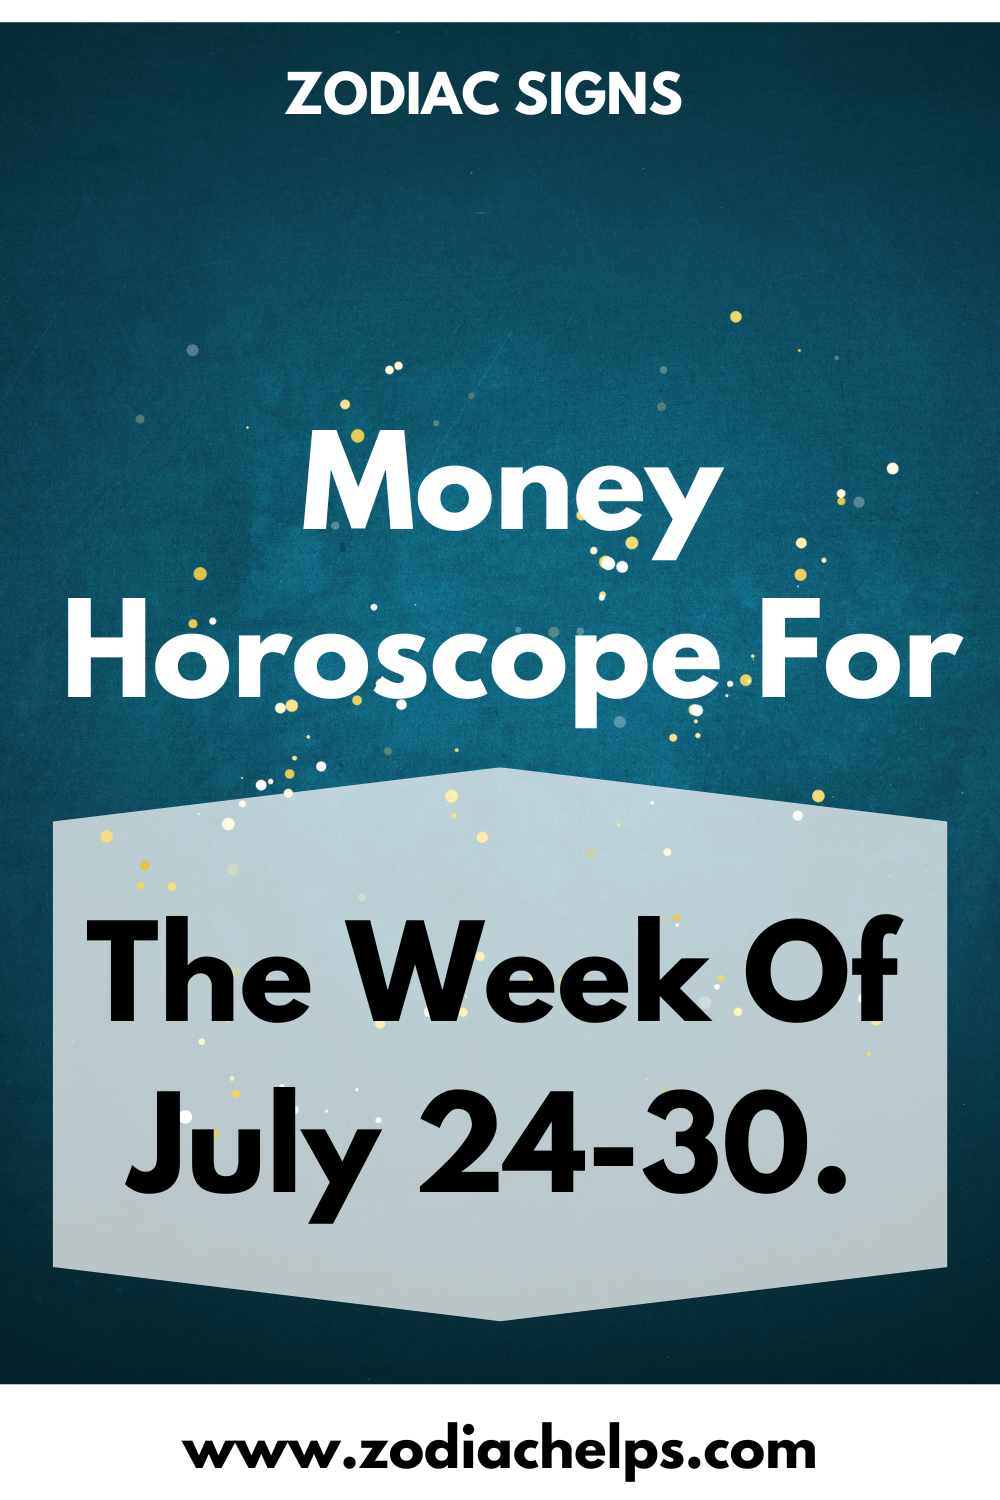 Money Horoscope For The Week Of July 24-30.